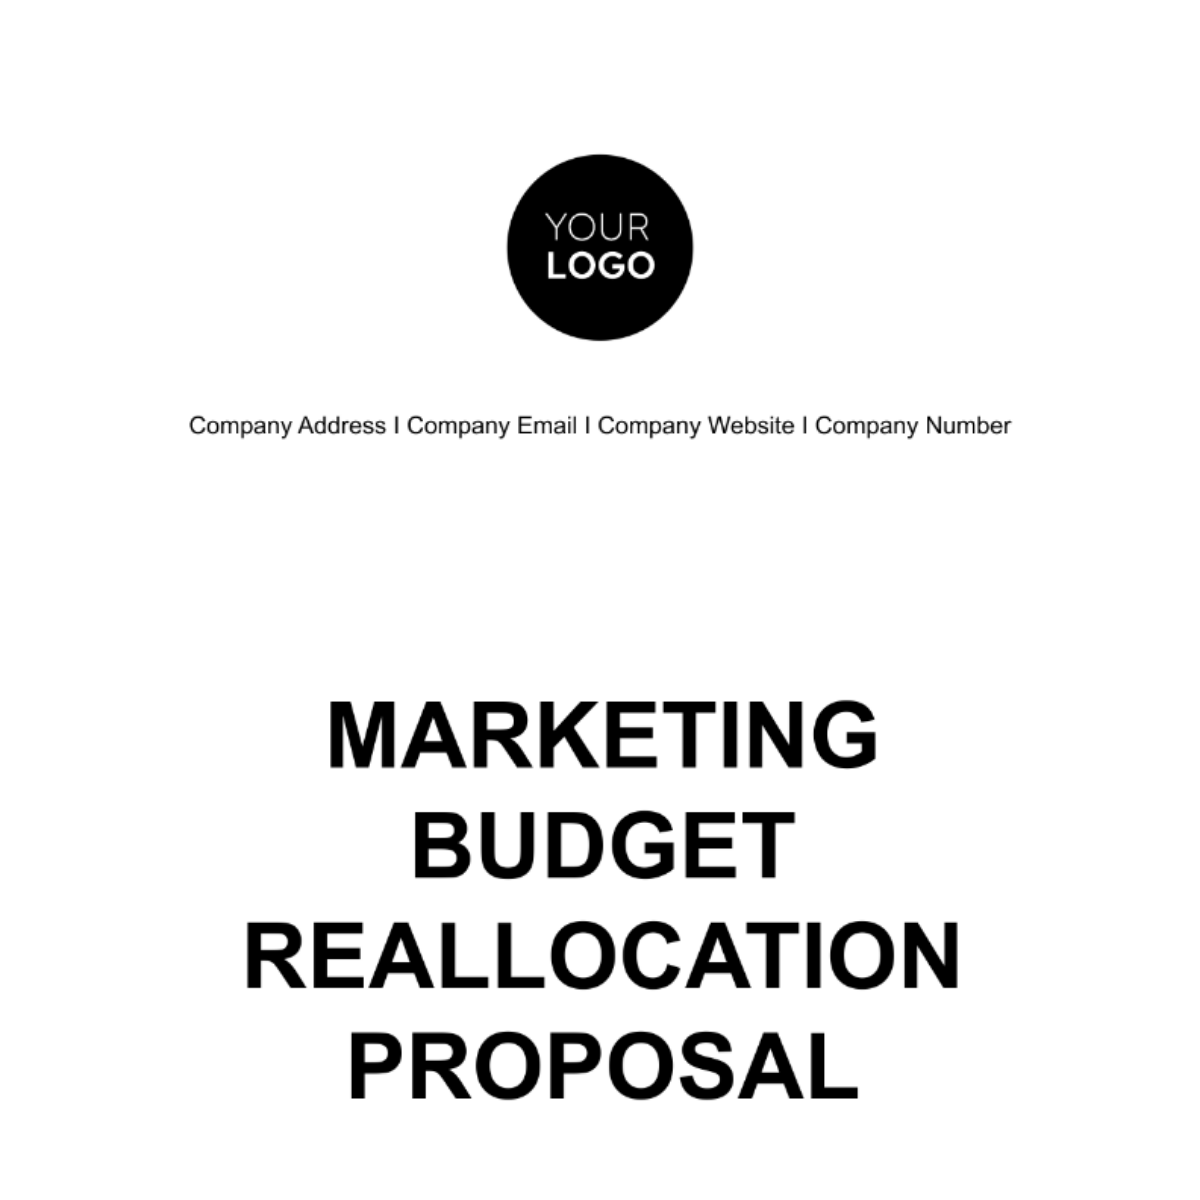 Free Marketing Budget Reallocation Proposal Template